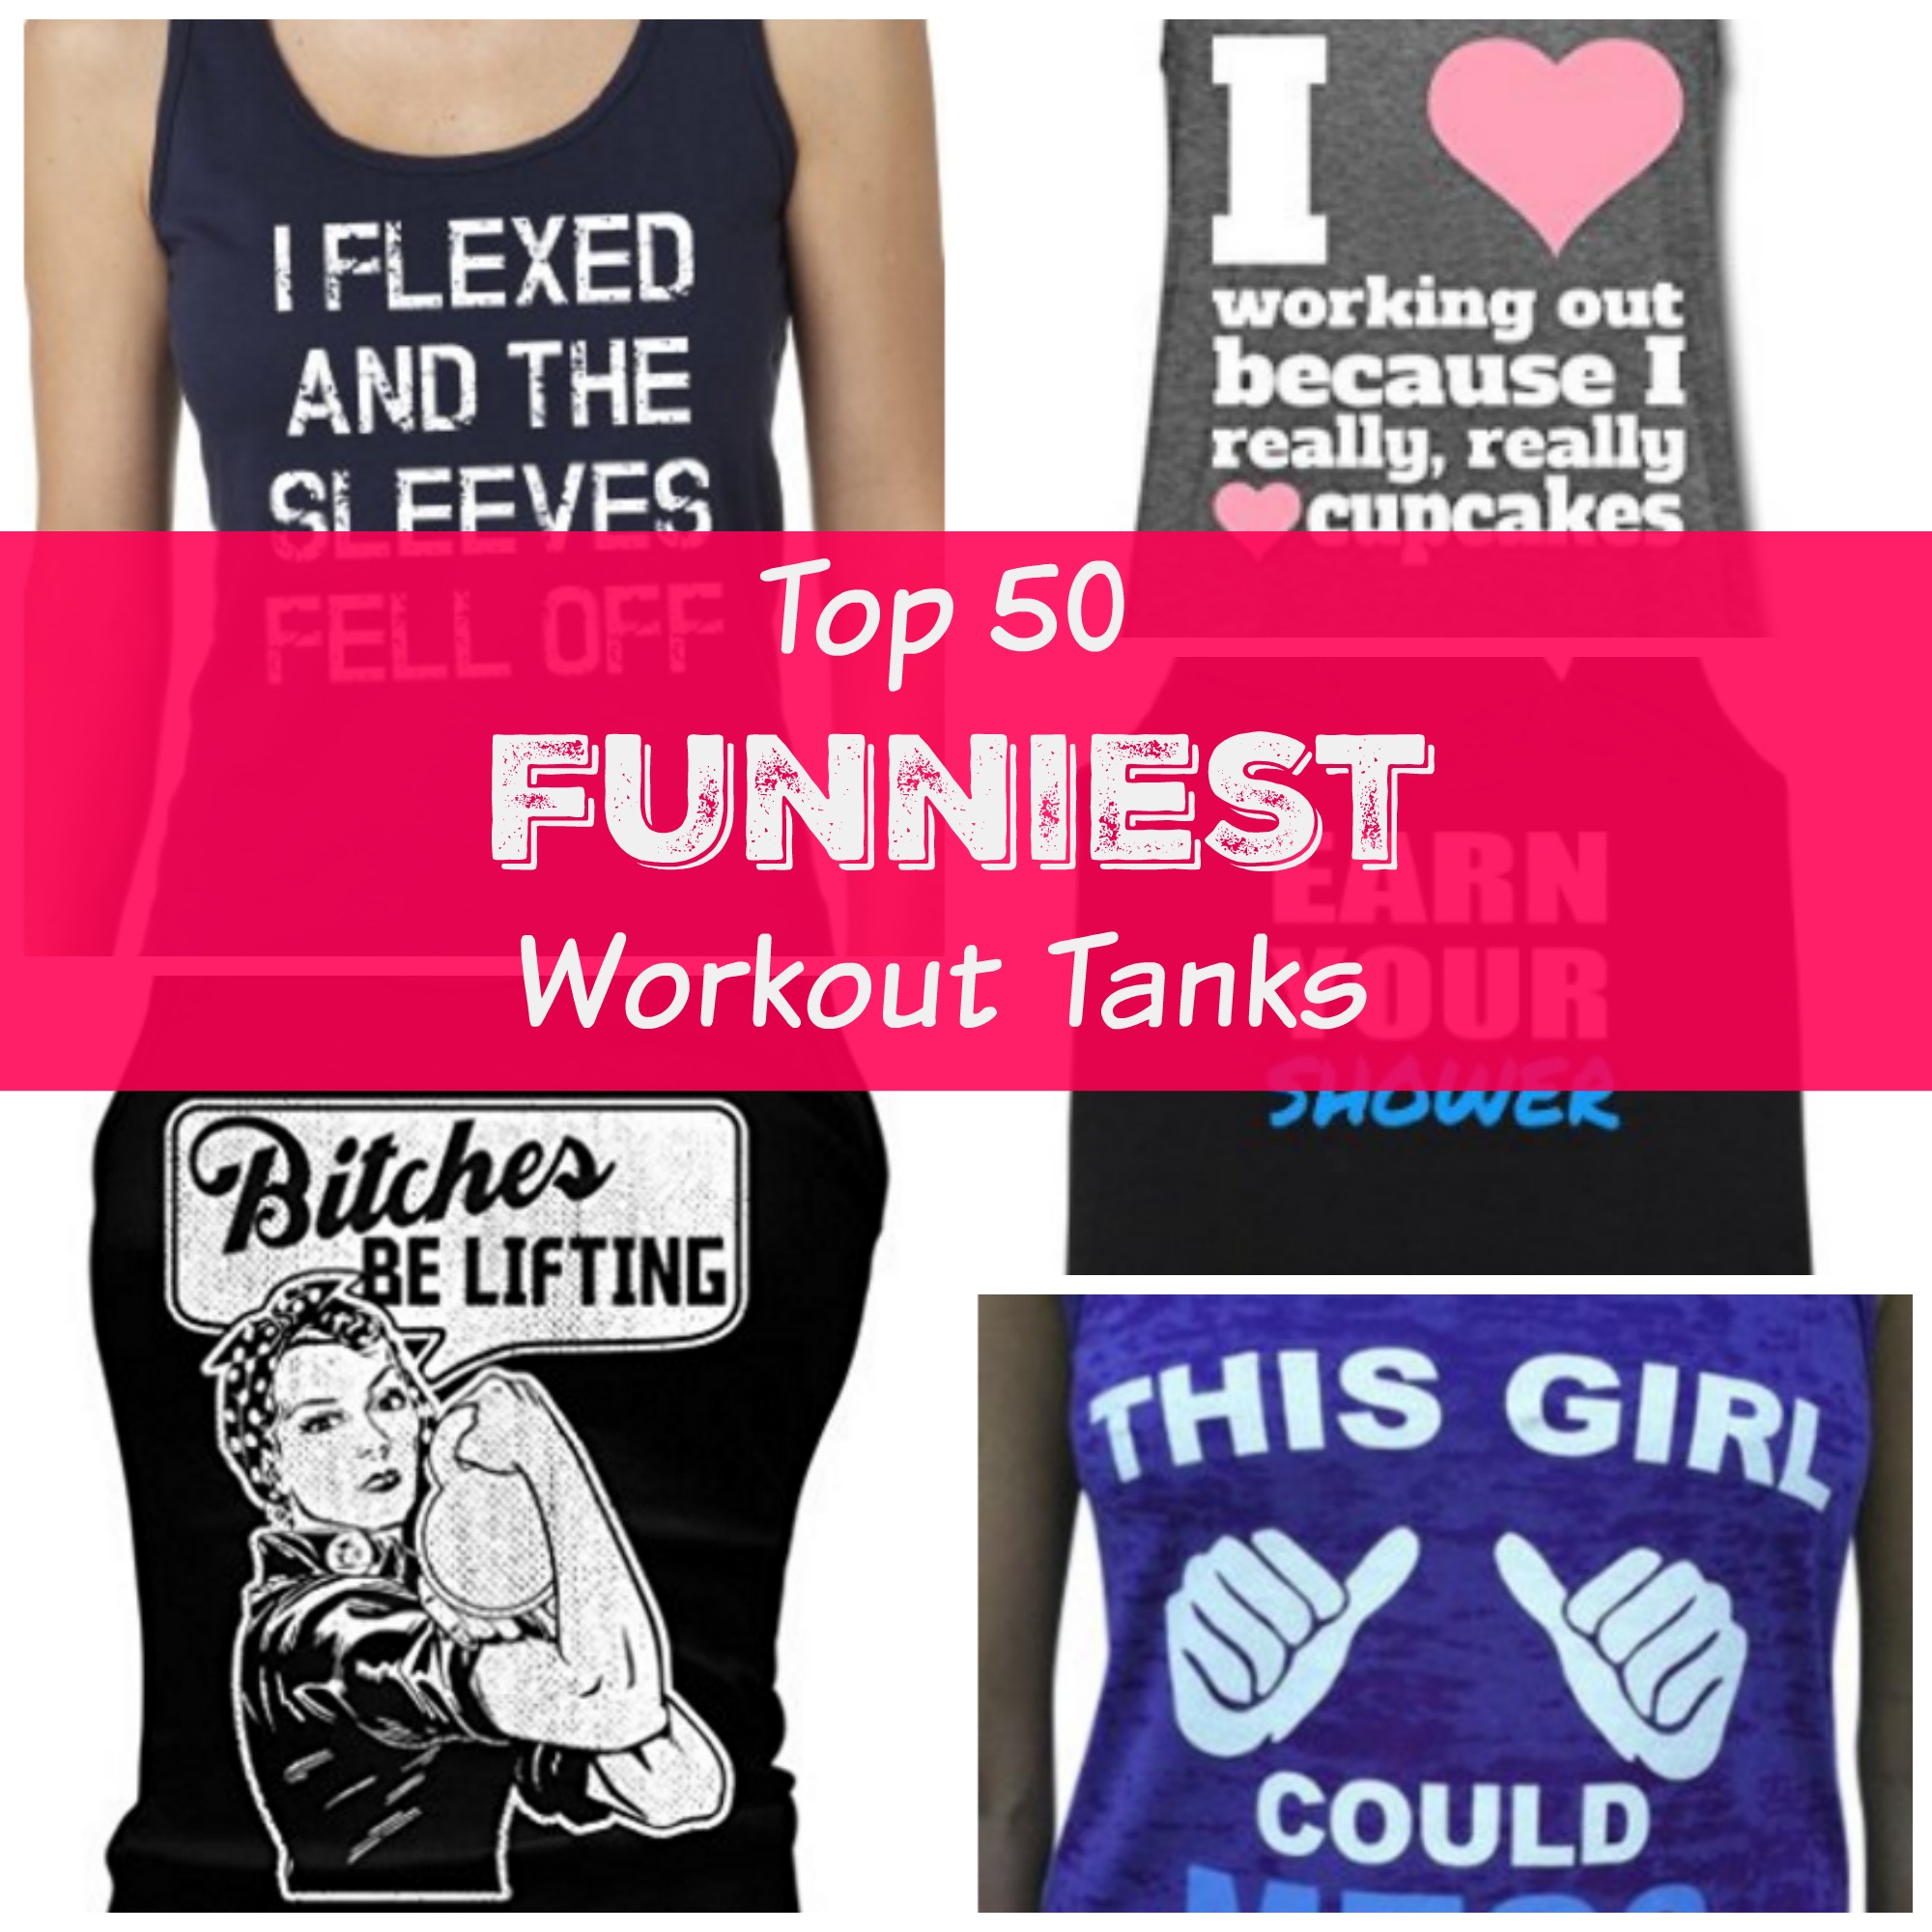 Top 50 Funniest Workout Tanks